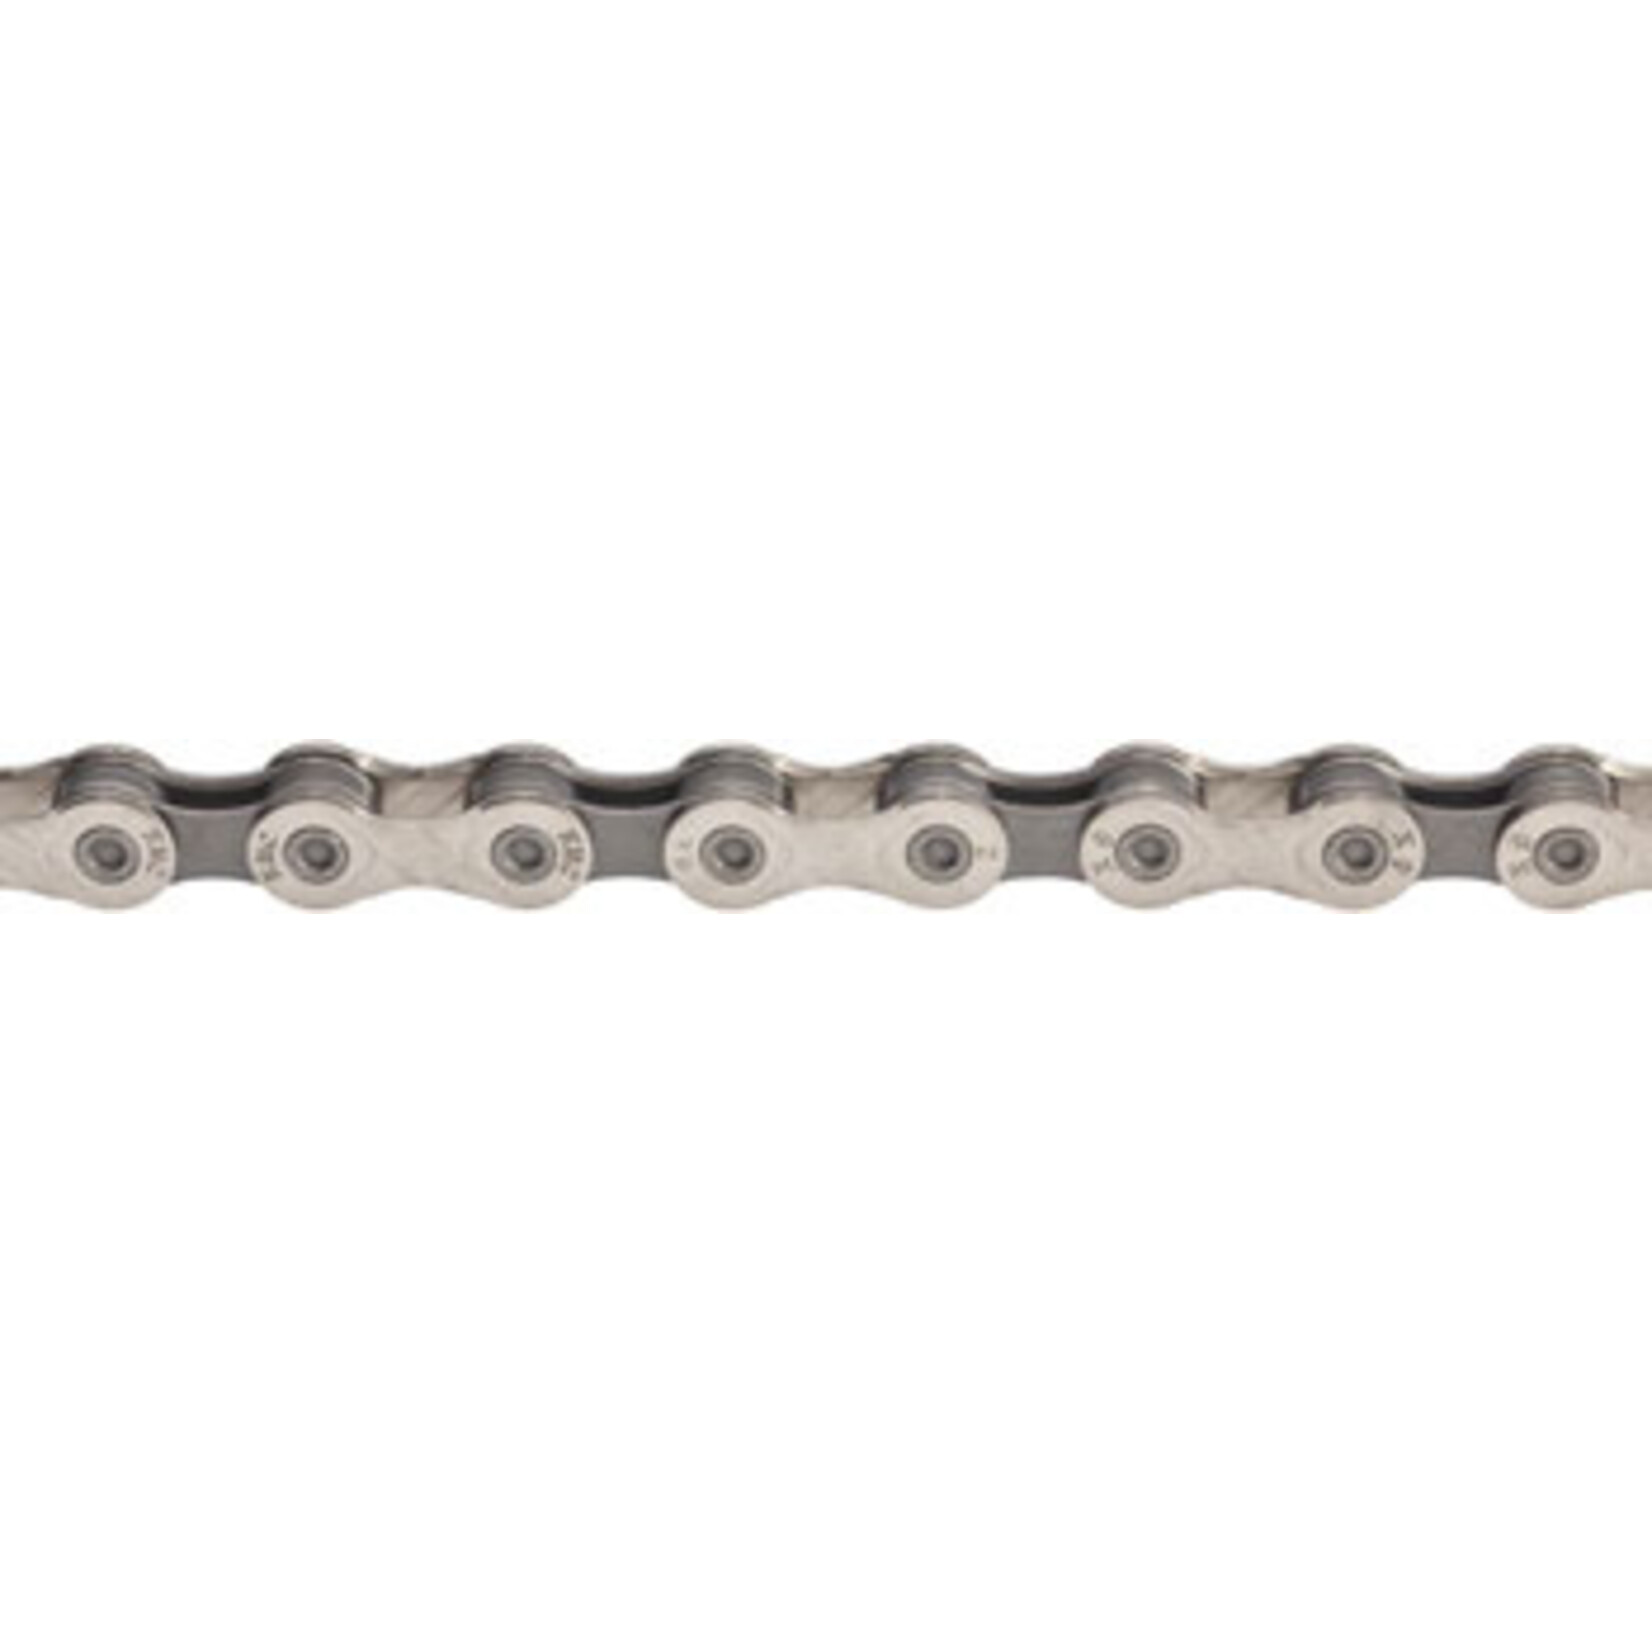 KMC X9.93 Chain - 9-Speed, 116 Links, Silver/Gray